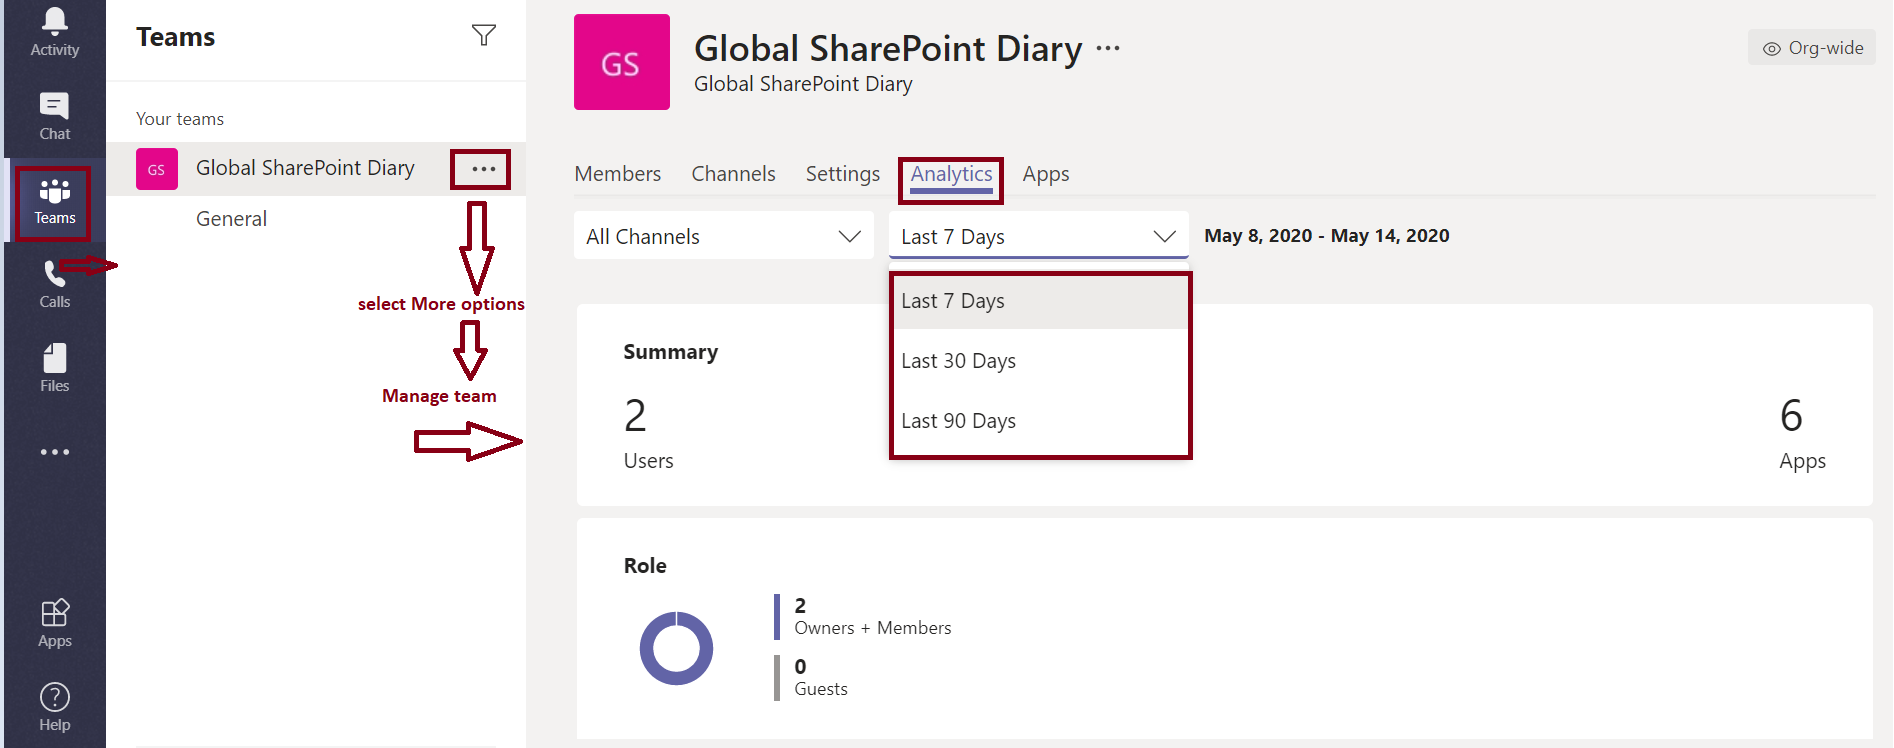 Channel analytics have arrived - Microsoft Teams